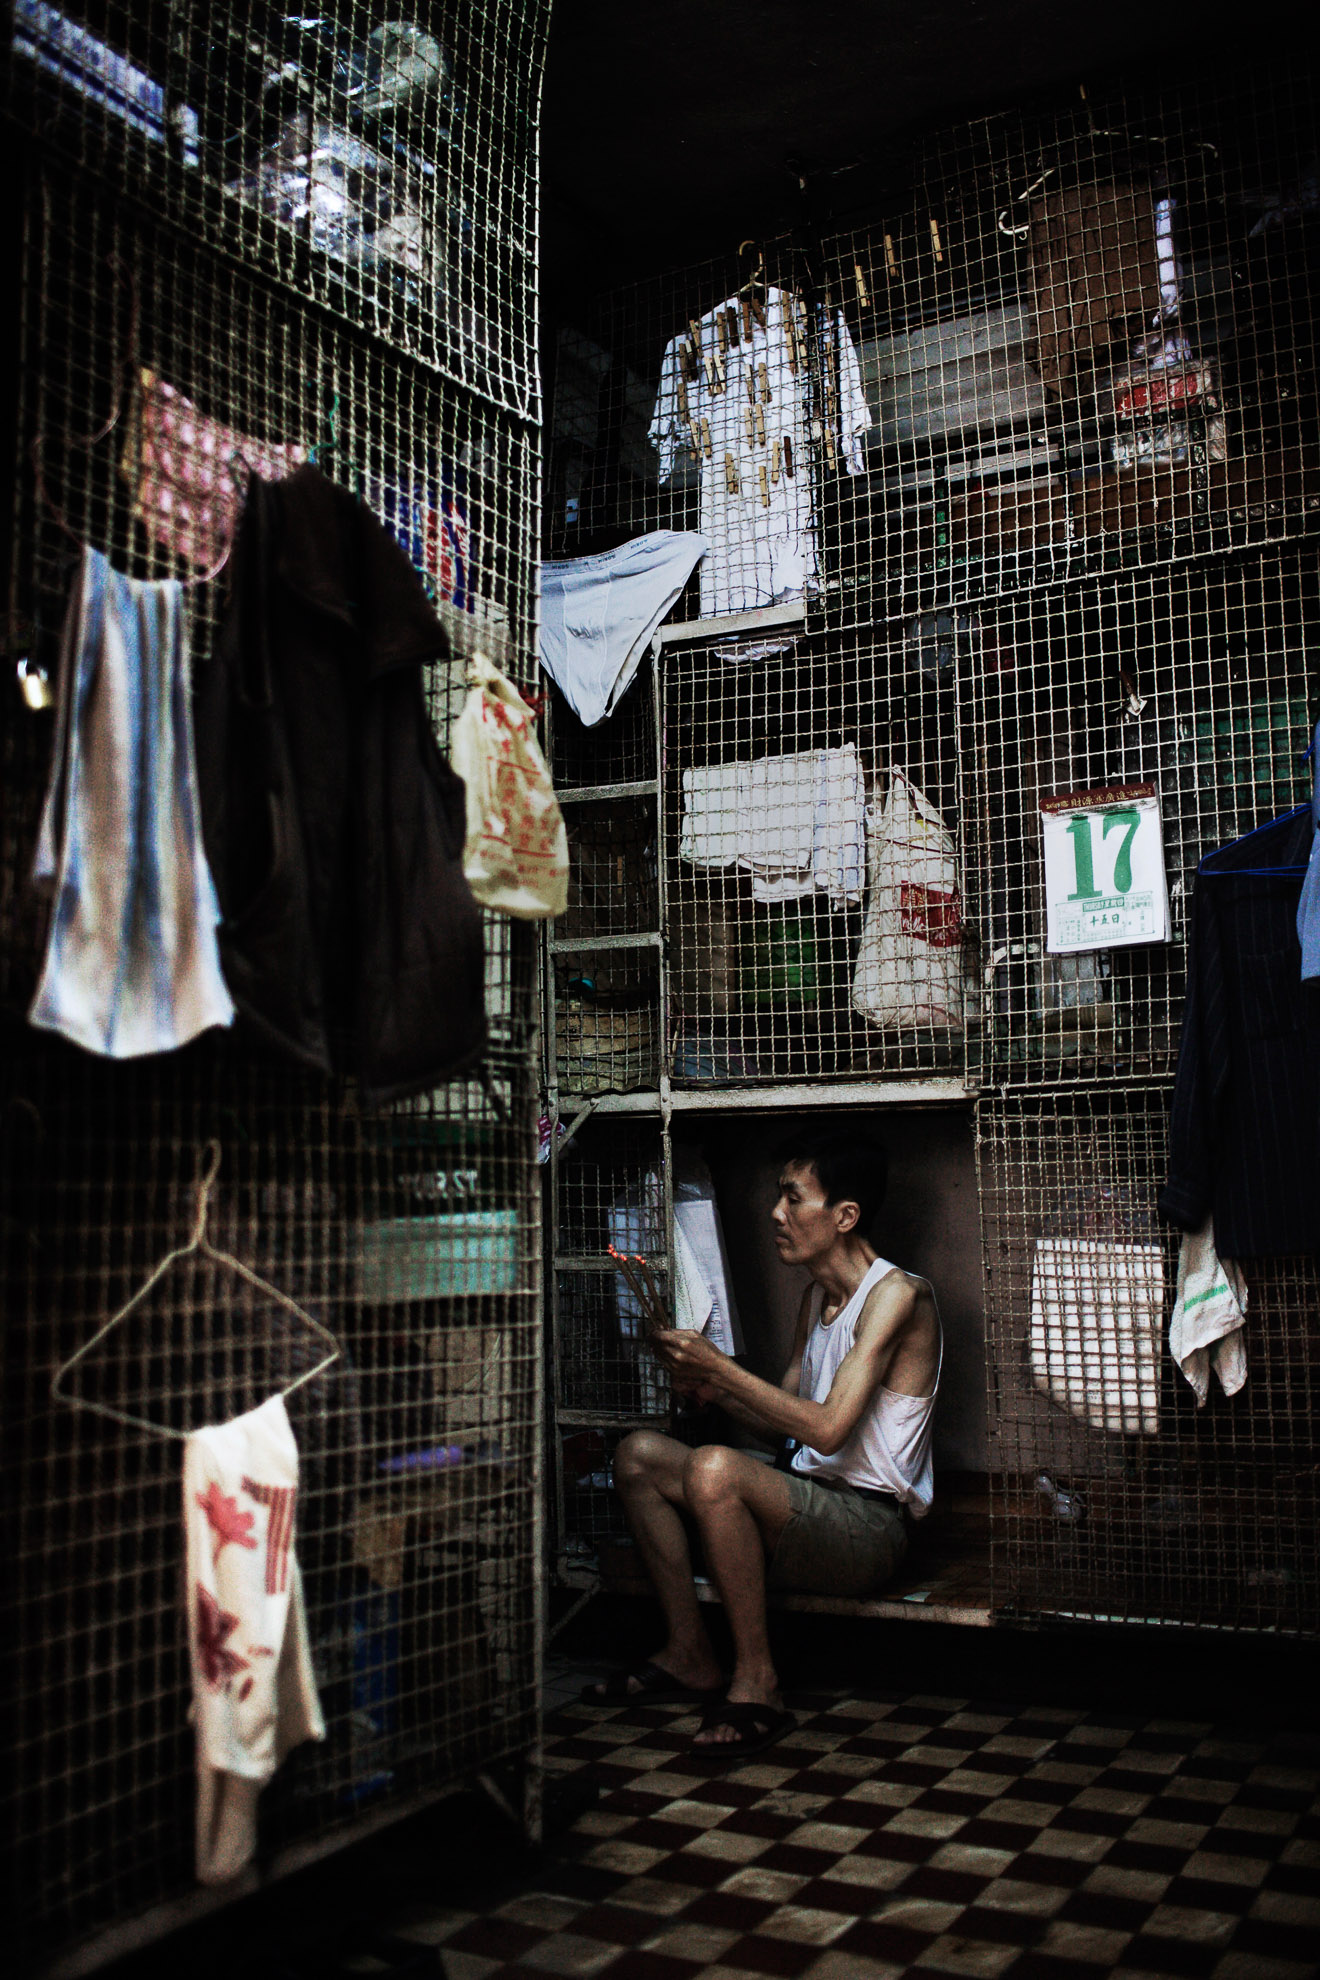 A man burns incense sticks seated in his small cage at the Hong Kong's Tai Kok Tsui district, July 16, 2008. In older districts such as Tai Kok Tsui, hundreds of elderly men still reside in caged cubicles in cramped, old tenement flats which house up to 12 individuals in often squalid conditions.